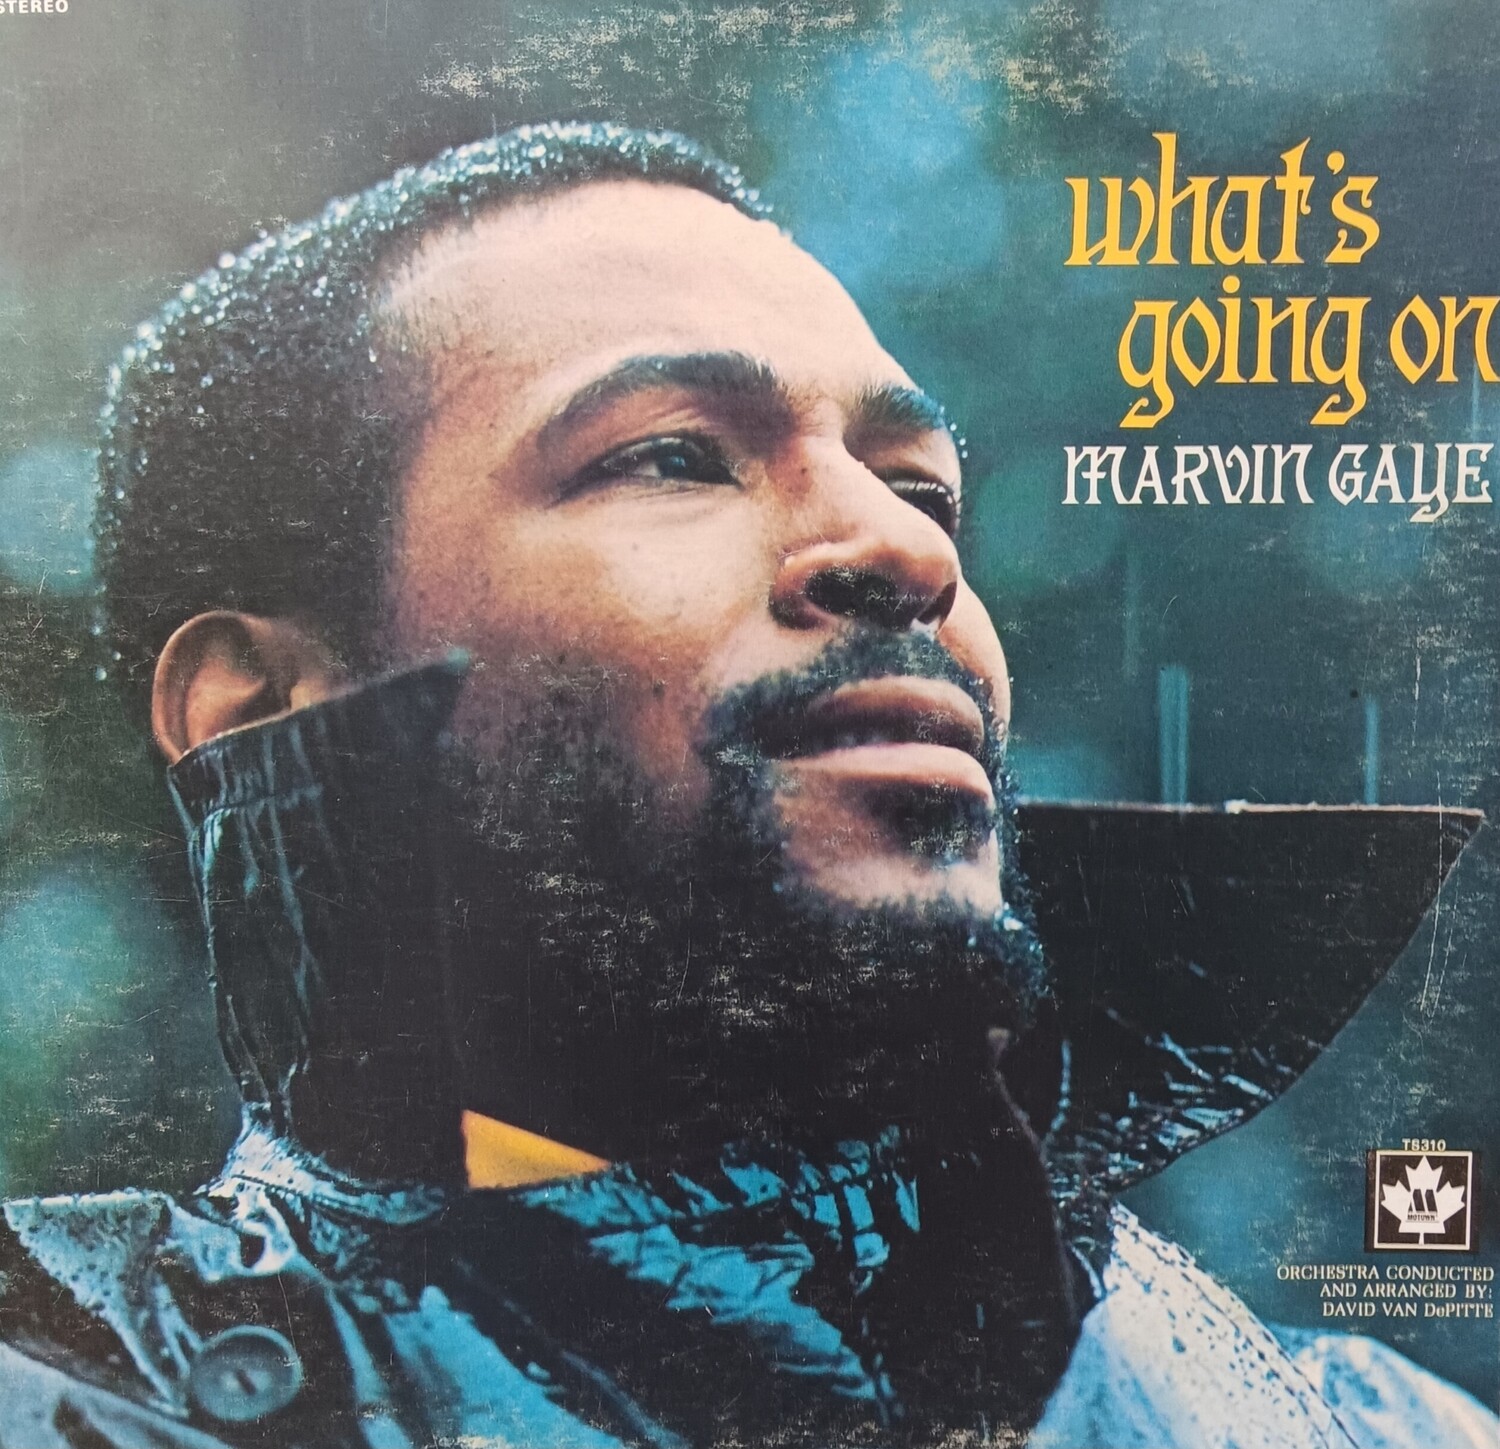 MARVIN GAYE - What's gping on